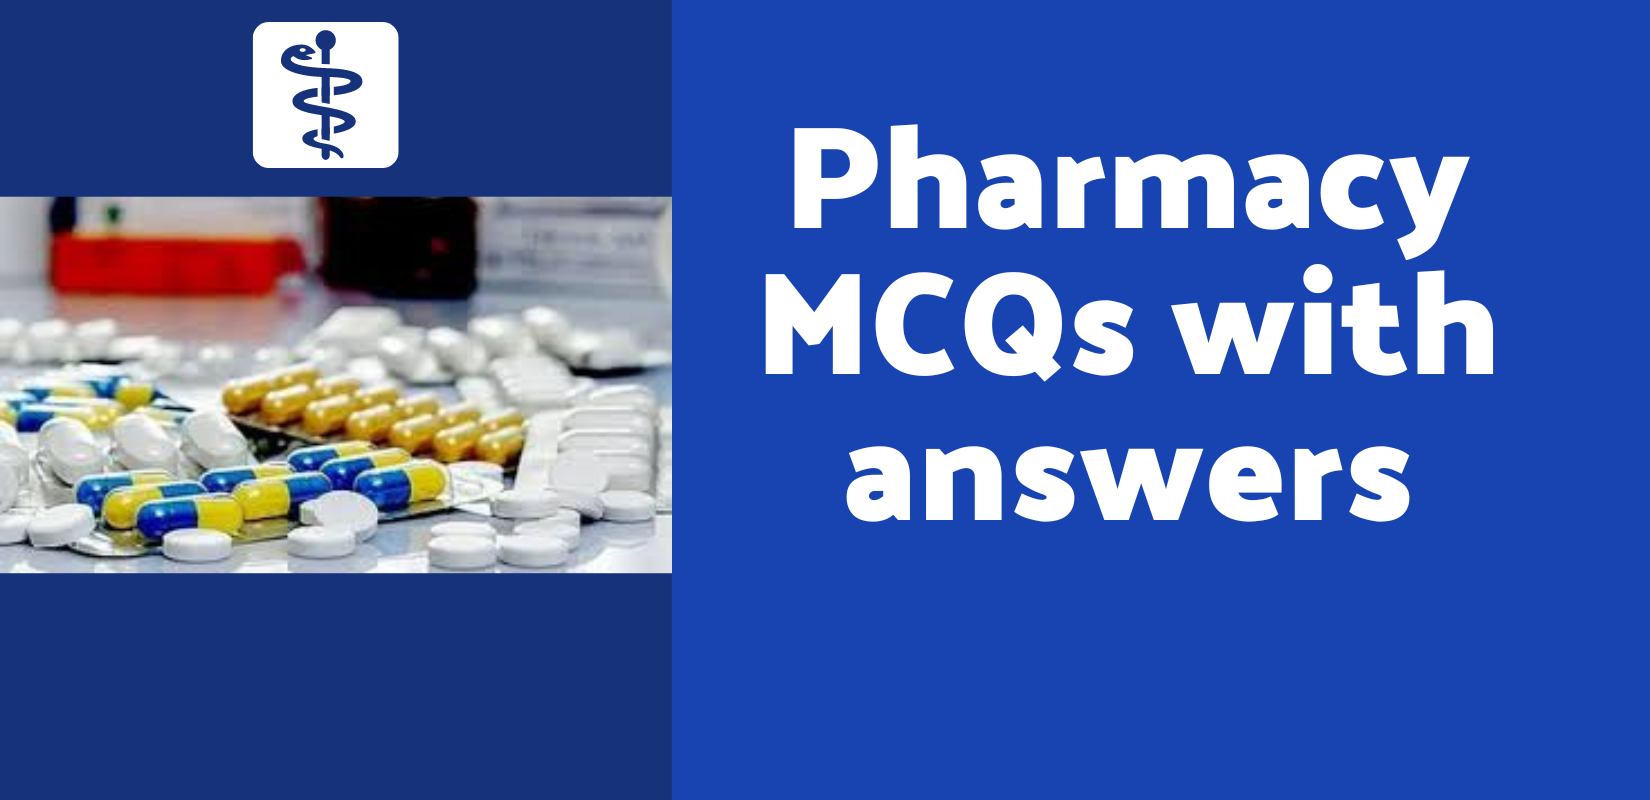 Pharmacy MCQs with answers